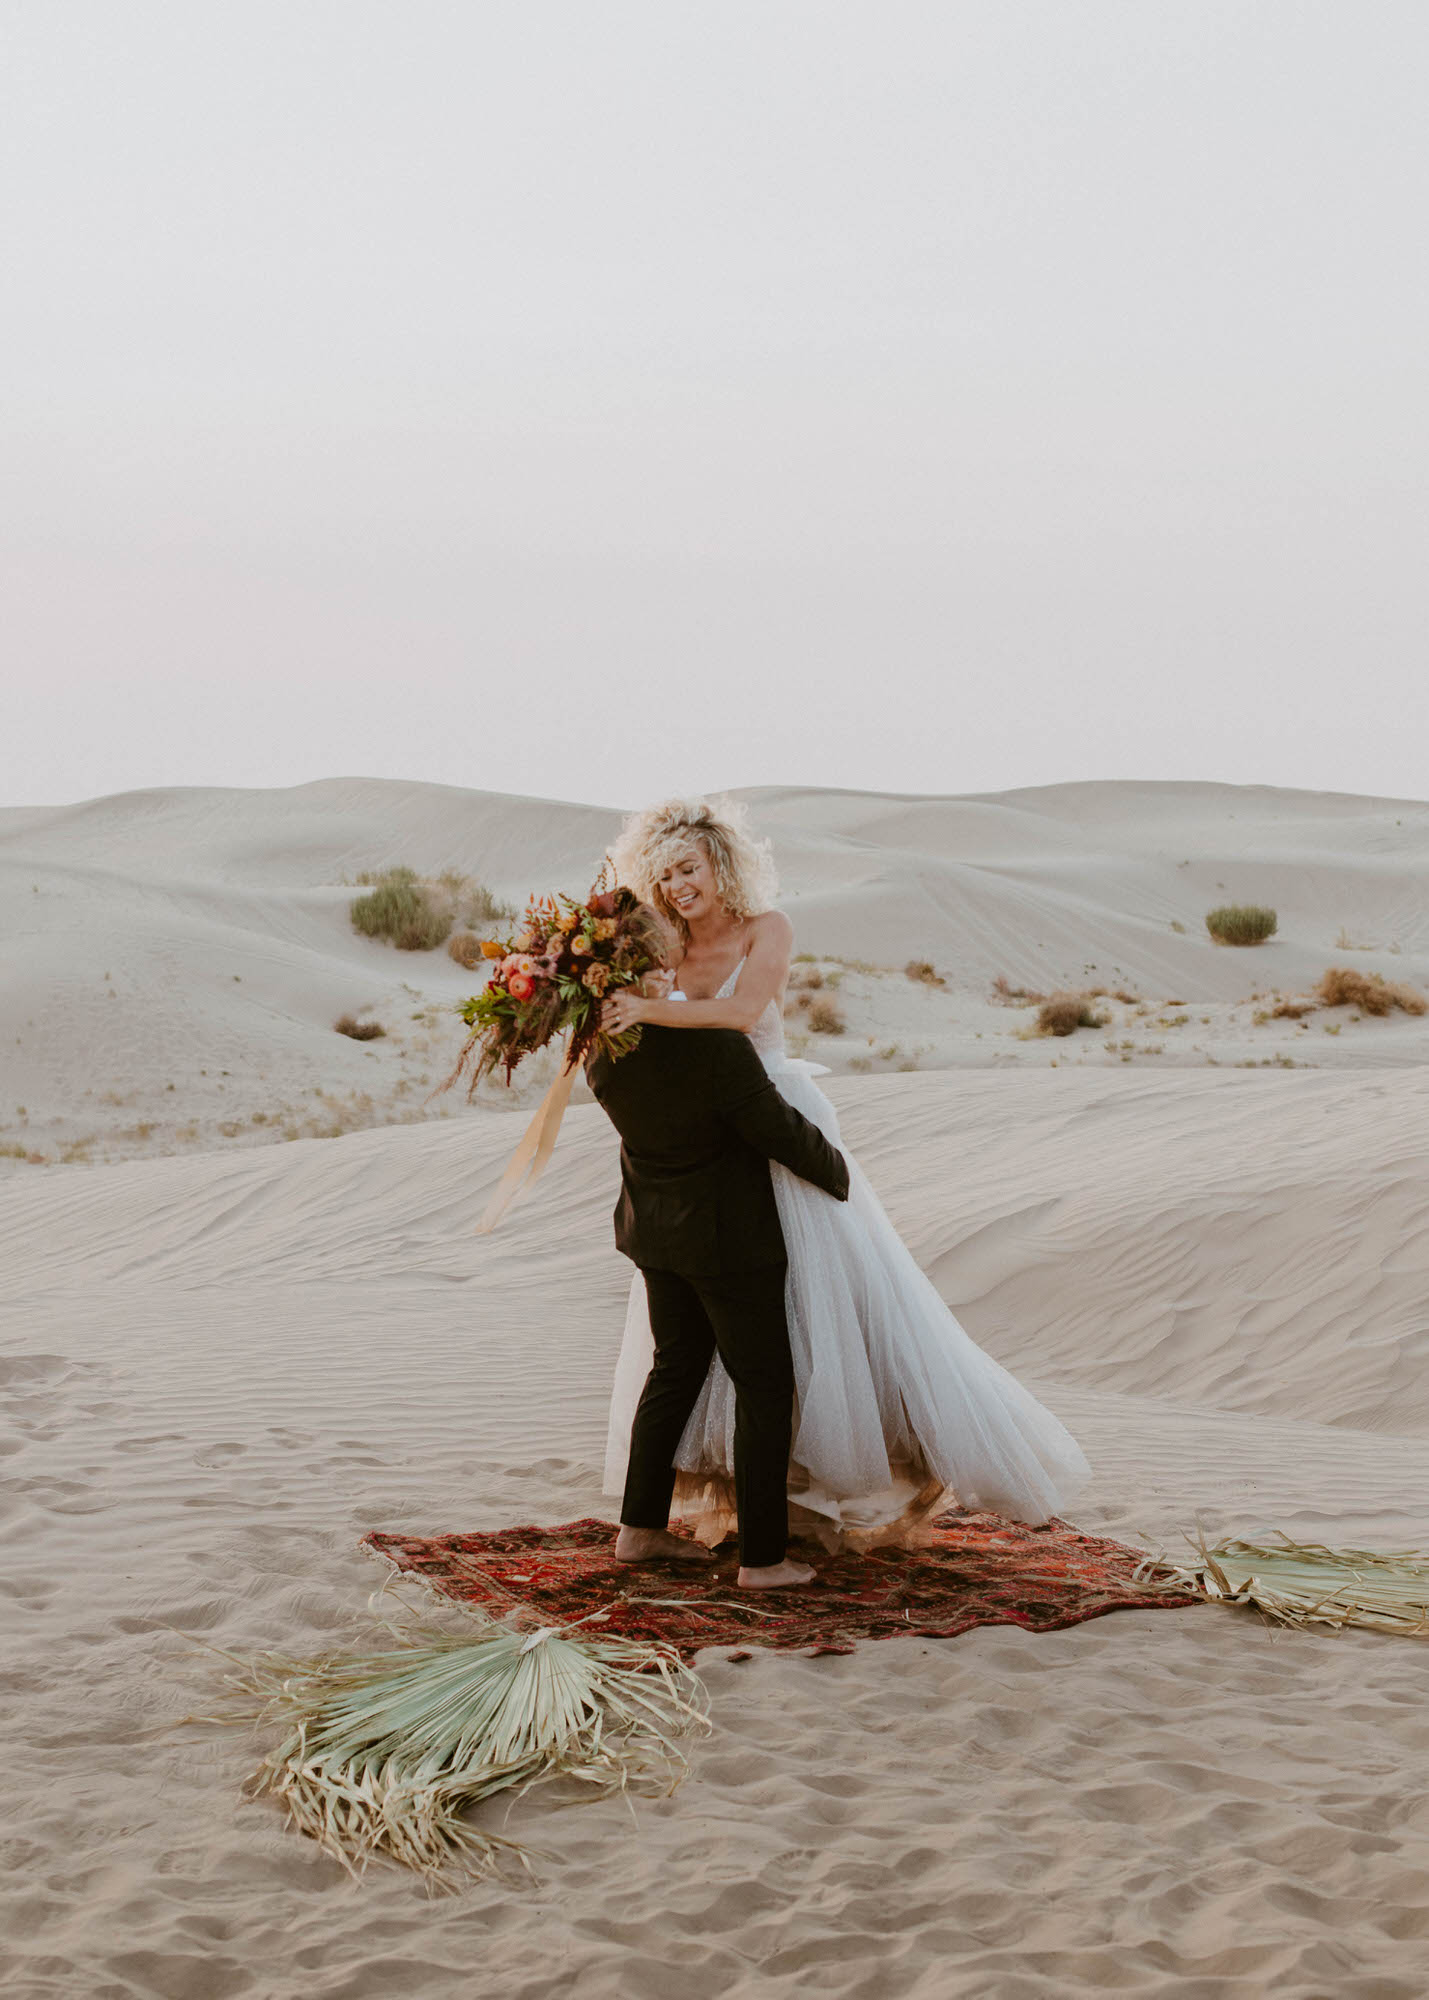 Bride picking up groom to celebrate on their wedding day at the Little Sahara Sand Dunes in Utah.